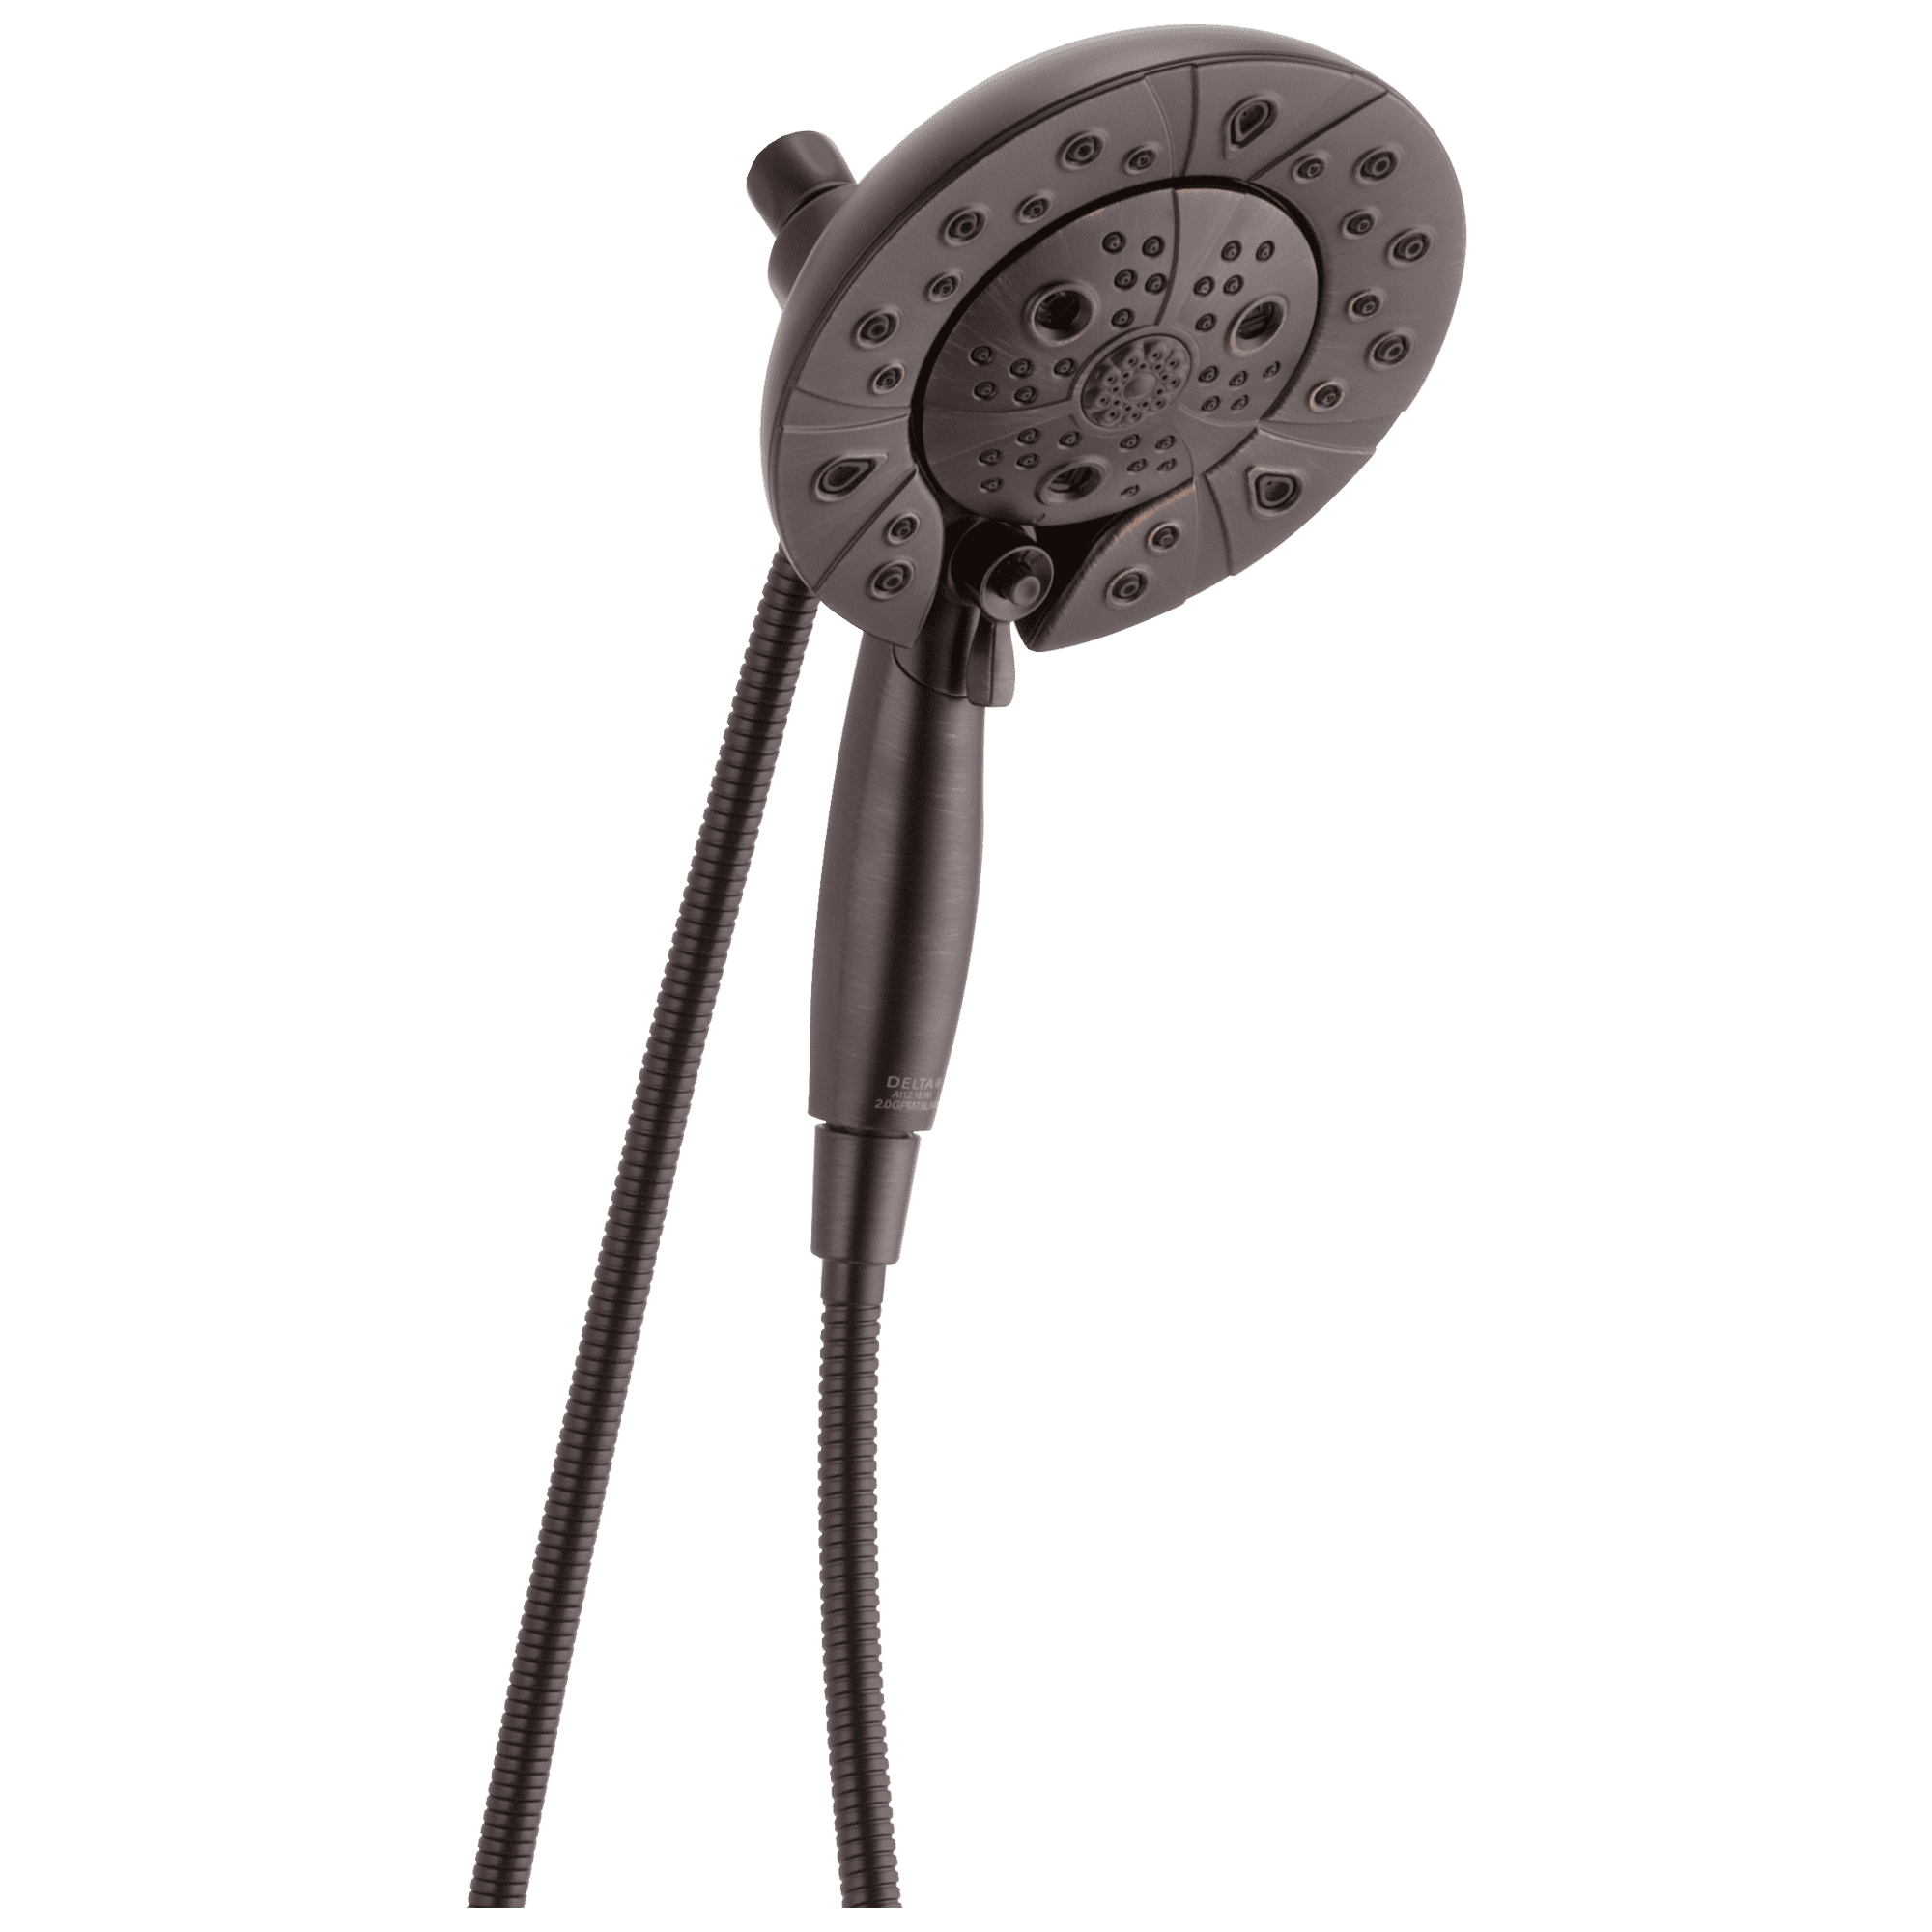 58480-rb-pk In2ition H2okinetic 5-setting Two-in-one Shower - Venetian Bronze